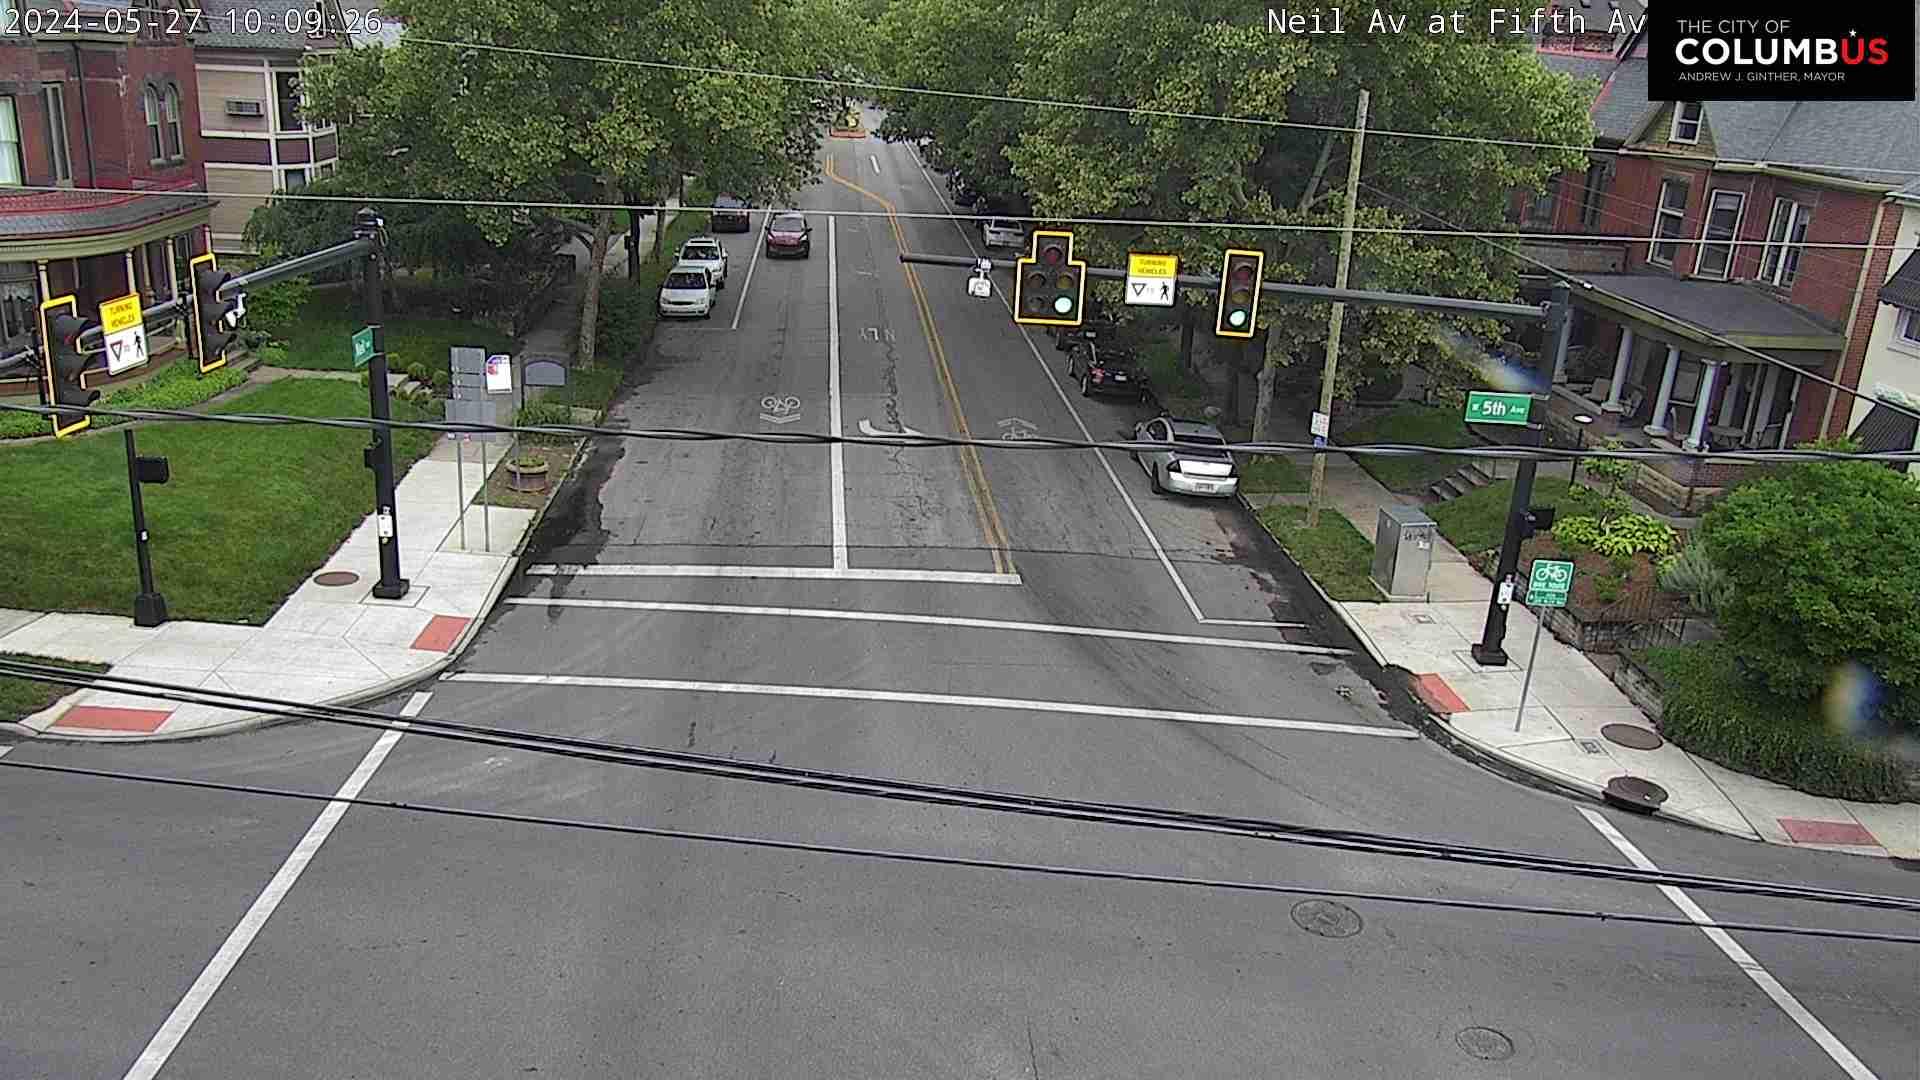 Traffic Cam Victorian Village: City of Columbus) Neil Ave at Fifth Ave Player